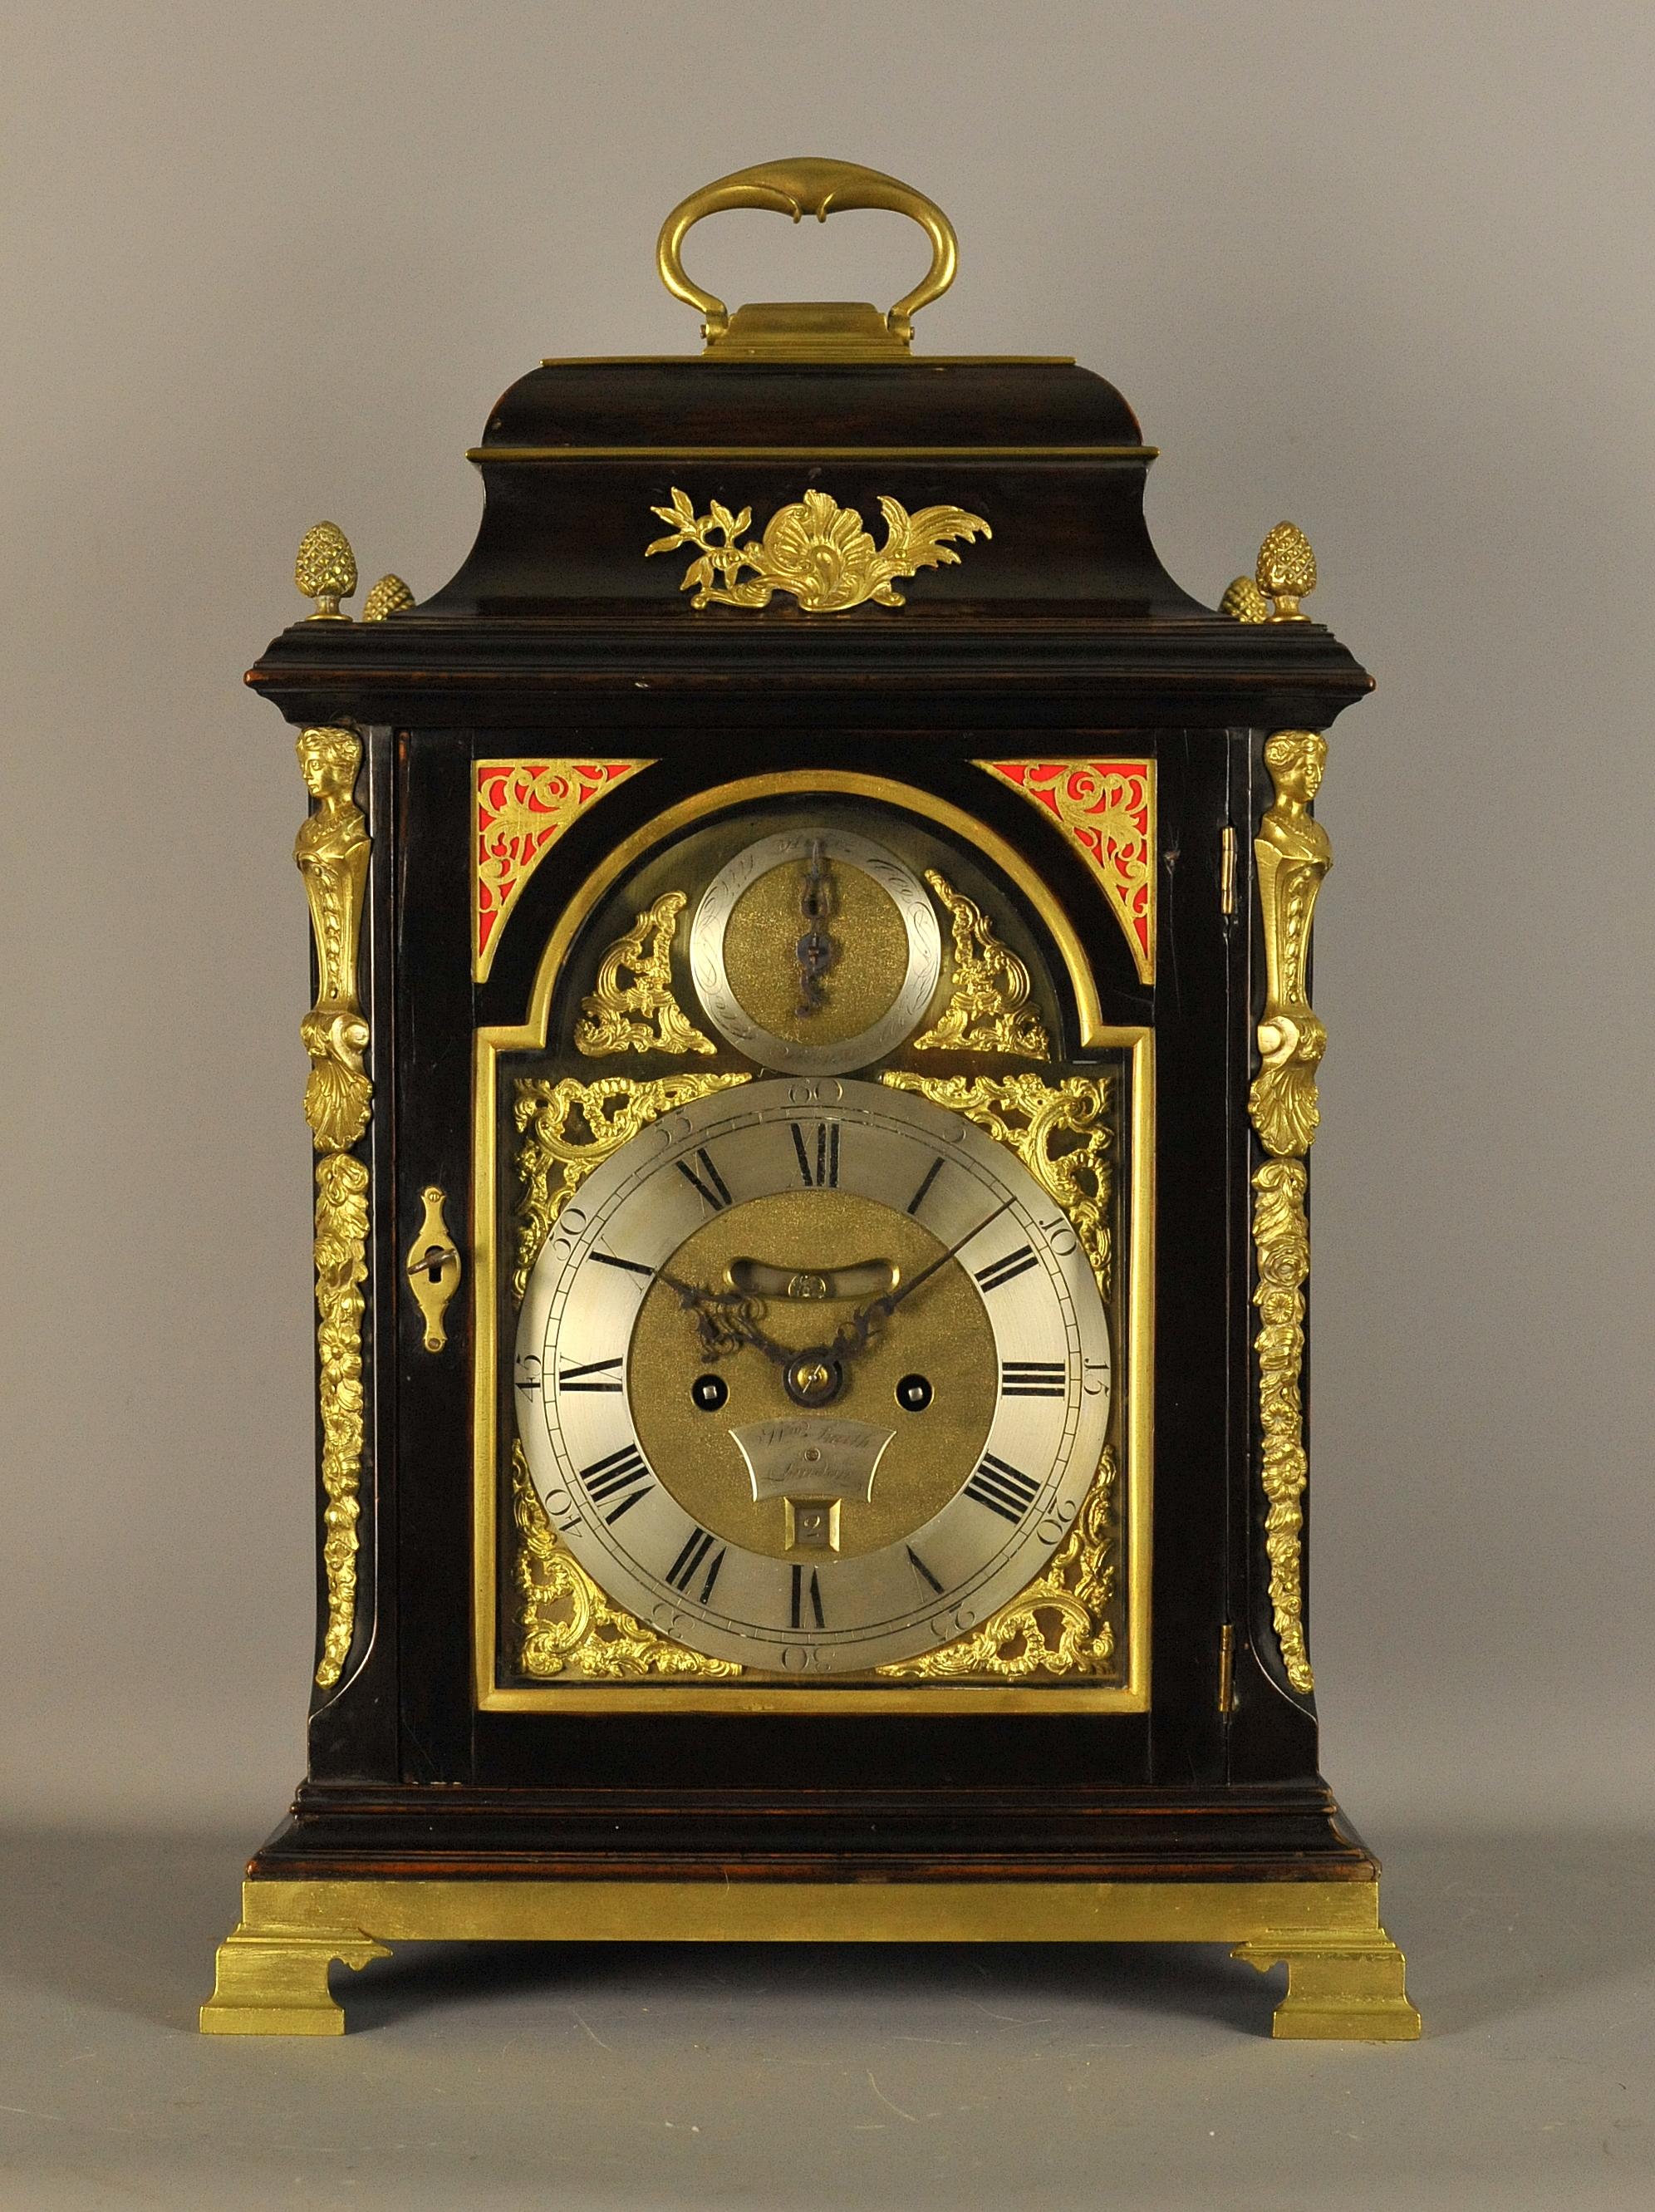 This is a very fine and impressive gilt brass mounted verge bracket clock by William Smith of London circa 1760
The double fusee movement retains its original verge escapement and has a beautifully engraved back plate depicting oriental scenes. It